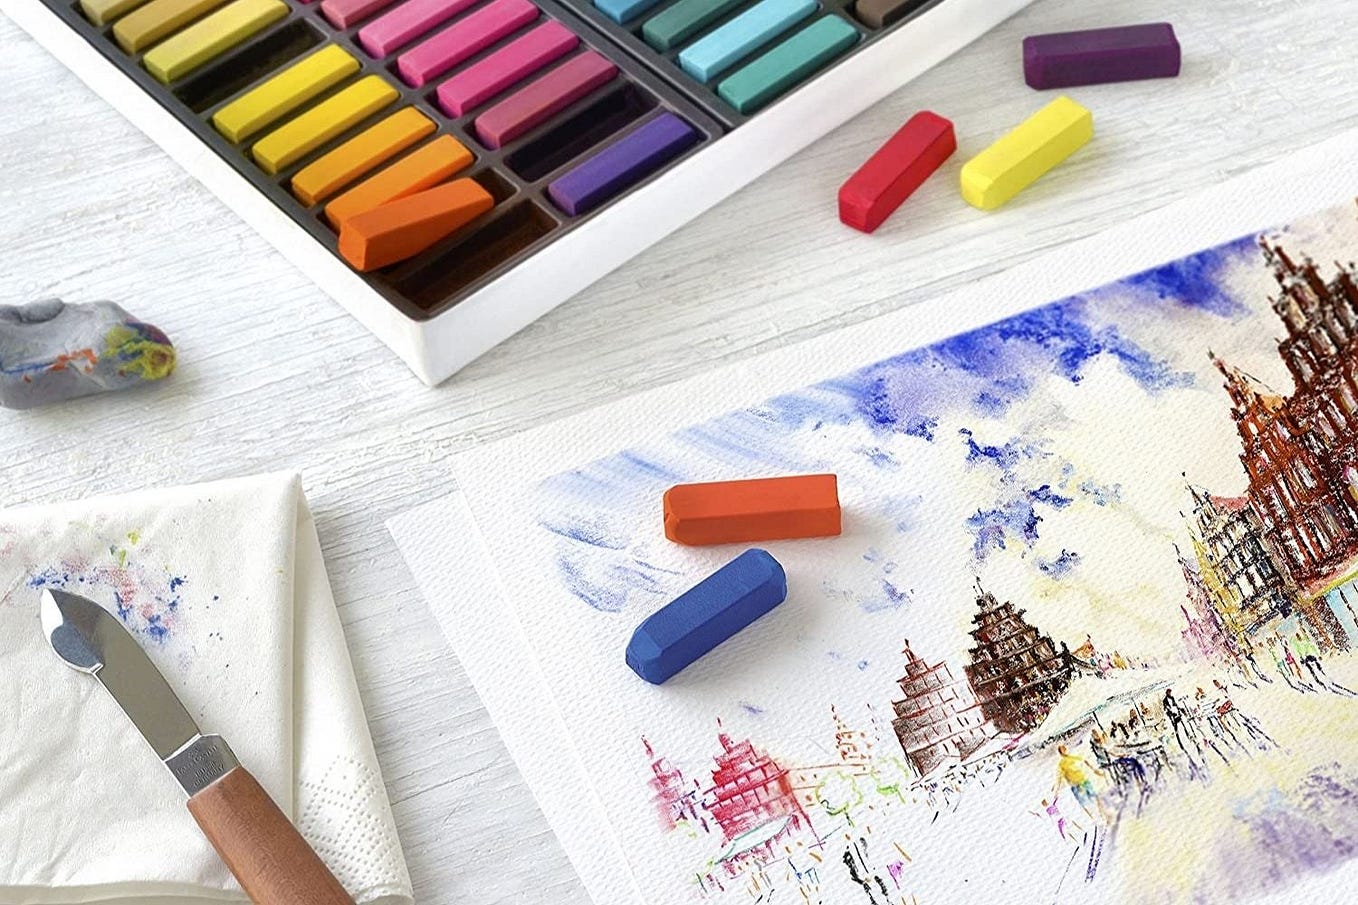 What is the difference between crayons and oil pastels?, Pastels v/s  Crayons, Oil Pastels Different From Crayons In Several Ways